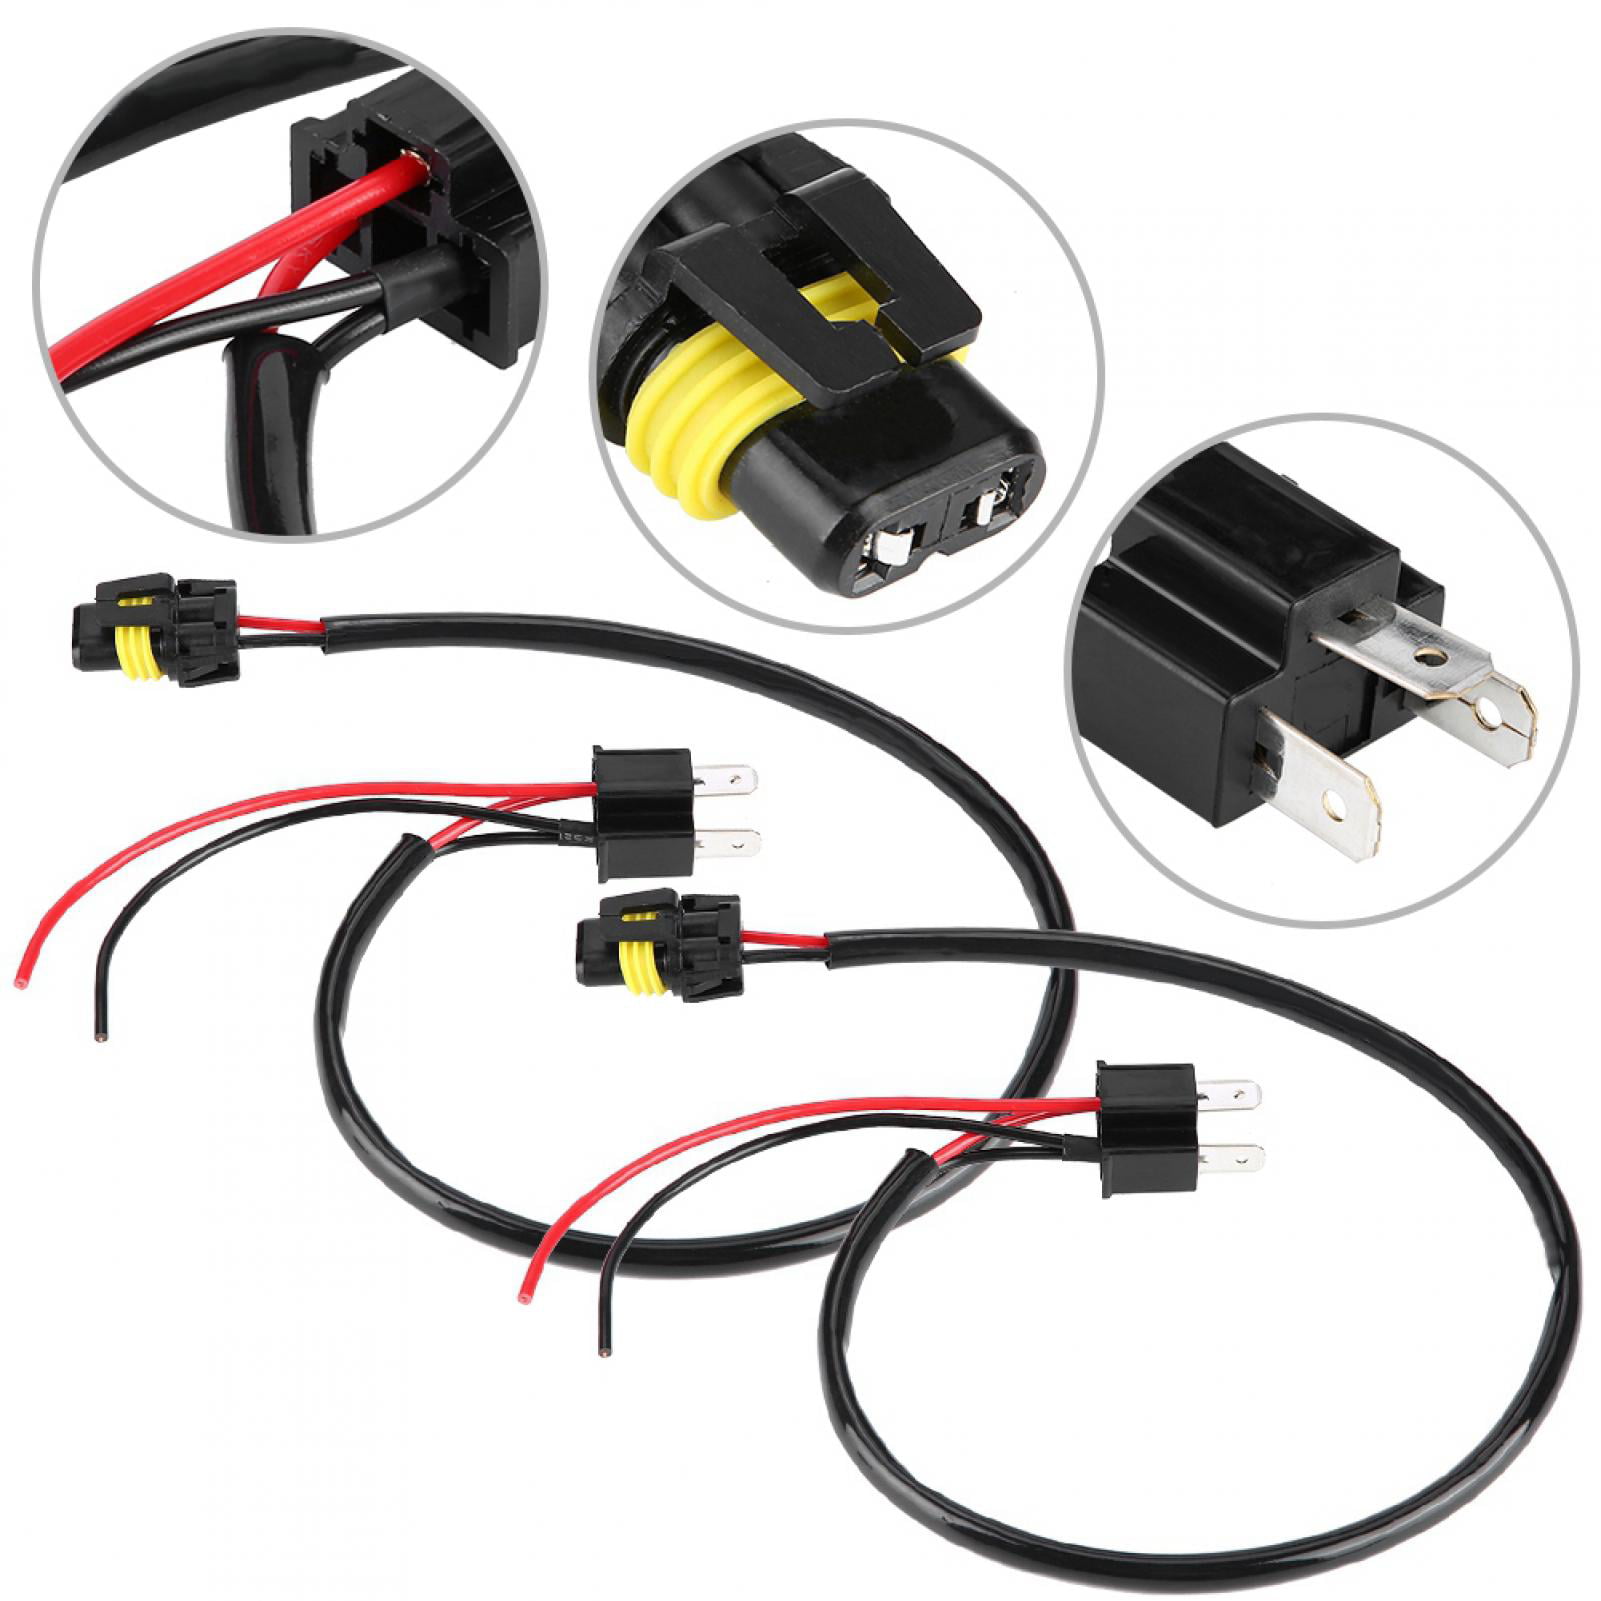 H4 to 9006 Bulbs Wire Harness Headlight Fog Light Harness Conversion Adapter Cable Ymiko 2pcs H4 Converter Cable